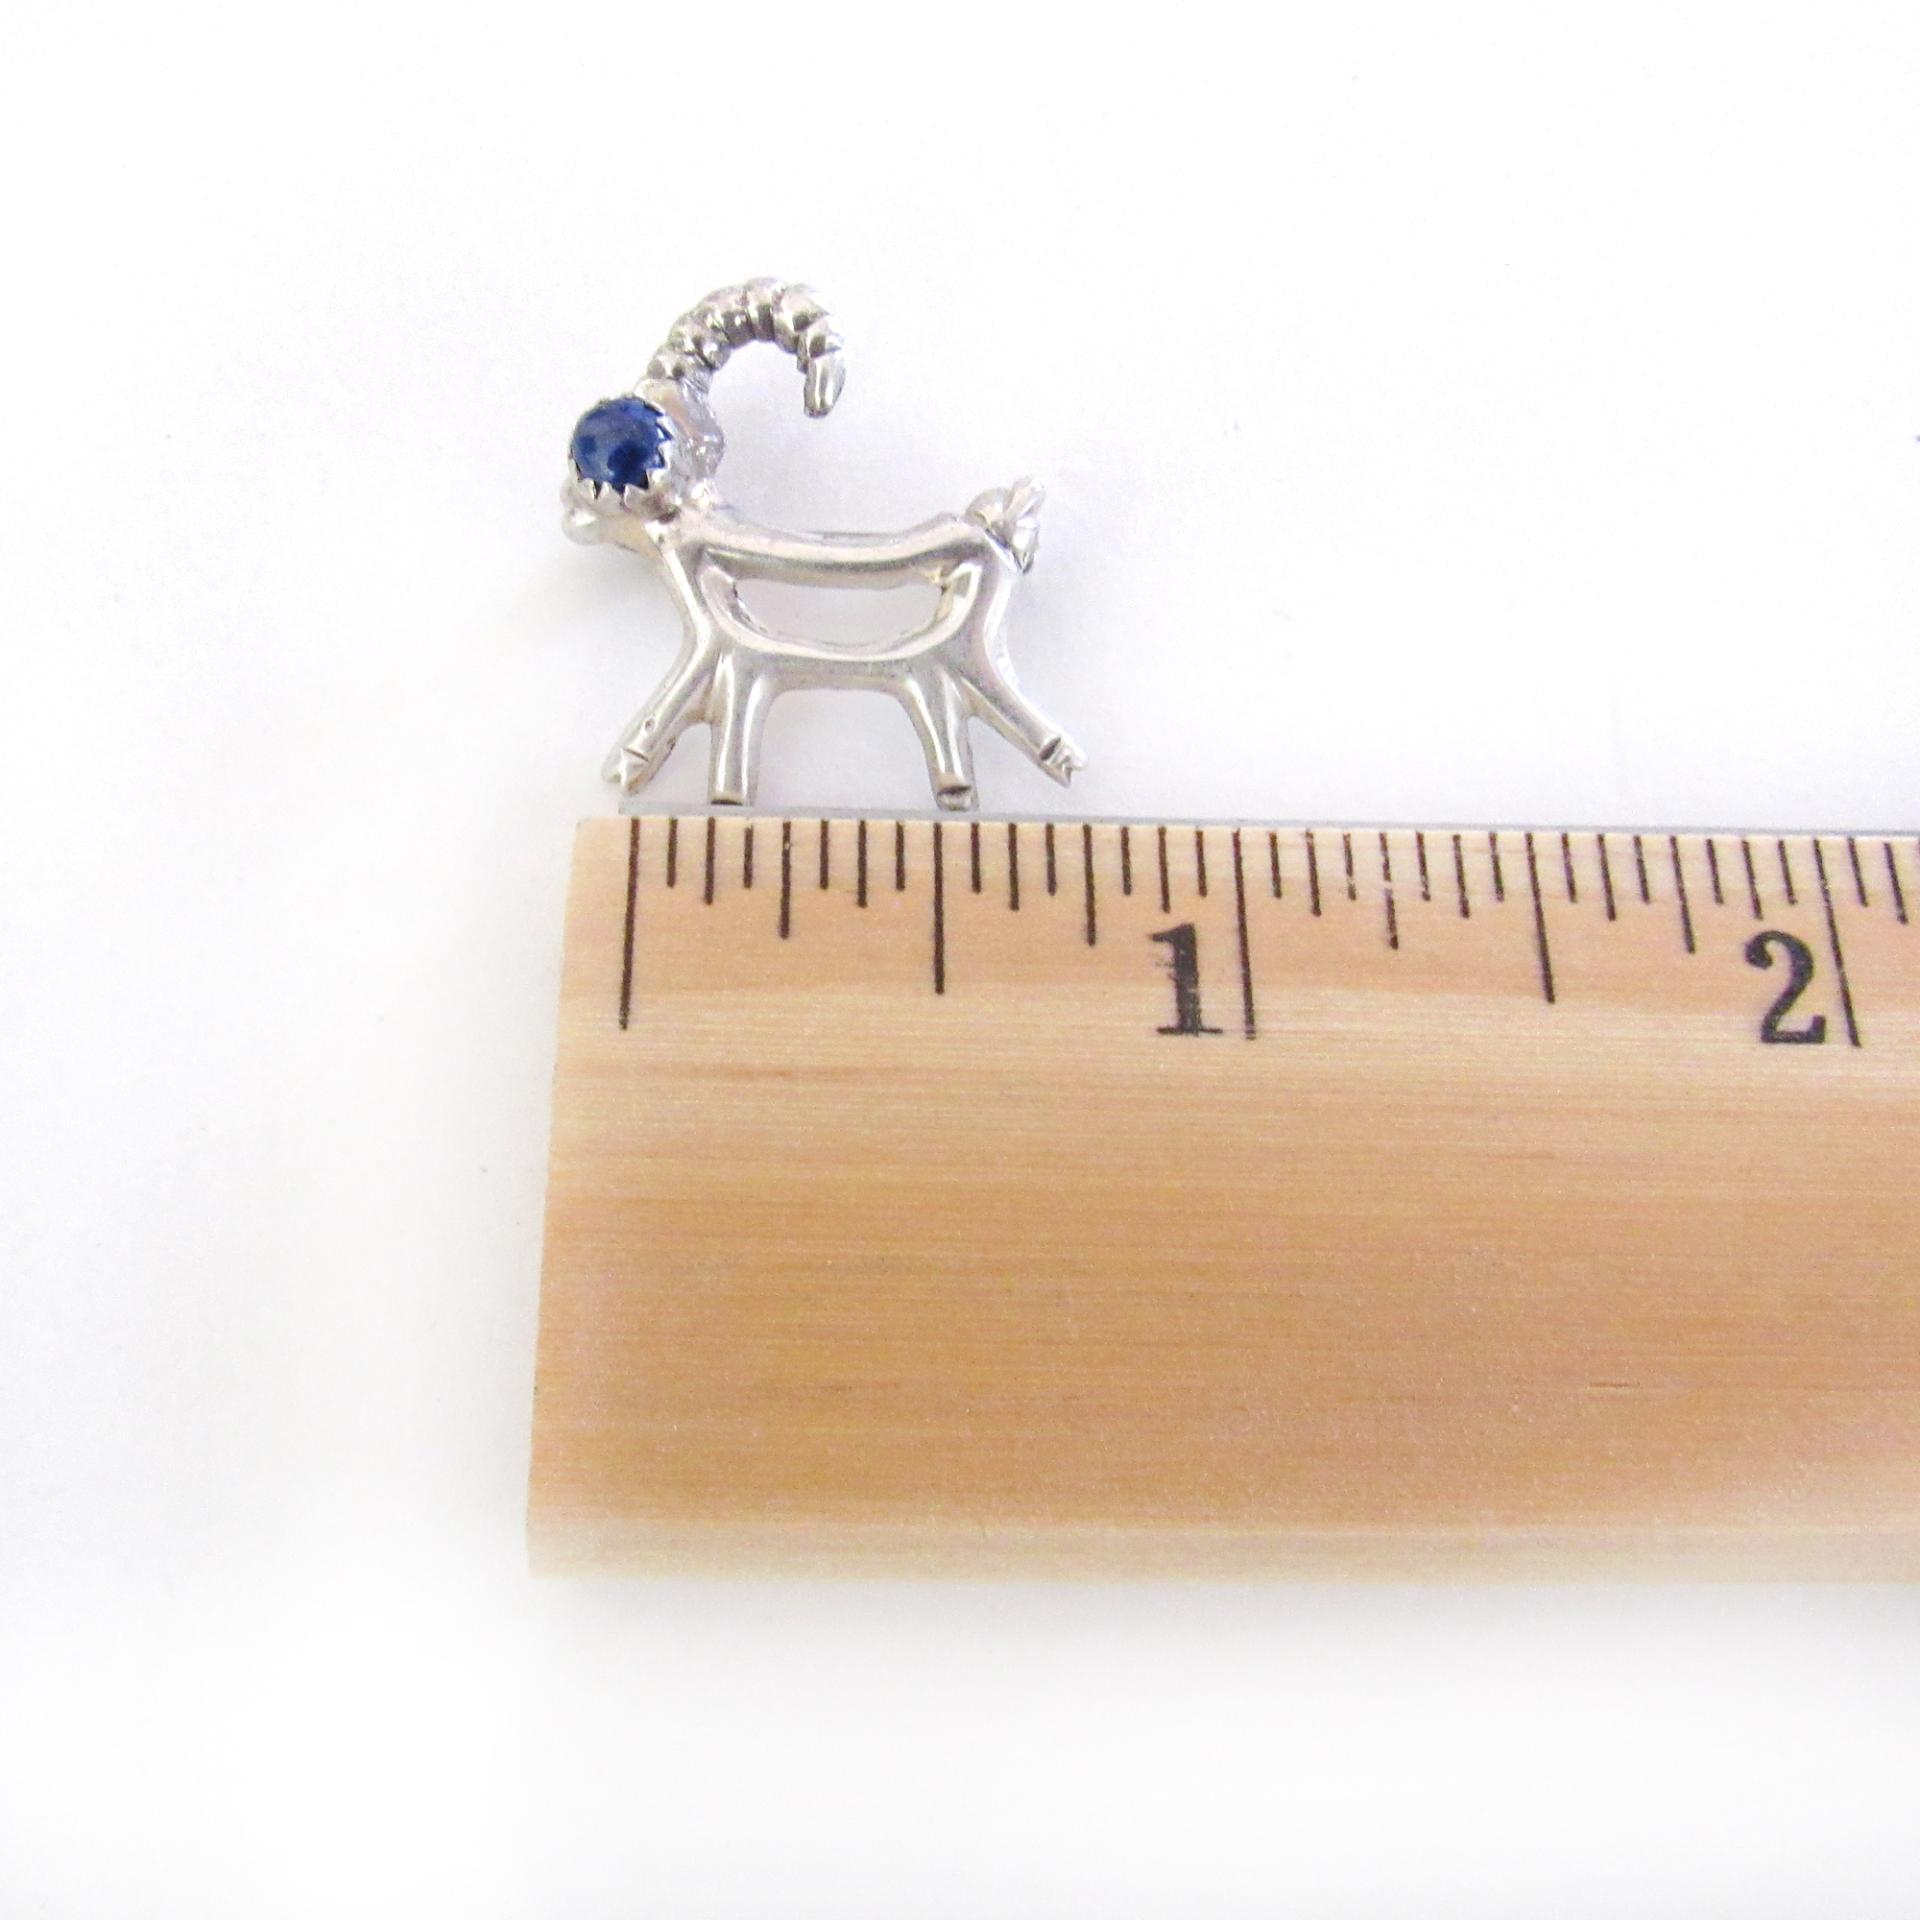 Small Sterling Silver Antelope Reindeer Pin with Blue Lapis Stone - Cute Whimsical Animal Lover Jewelry Gifts